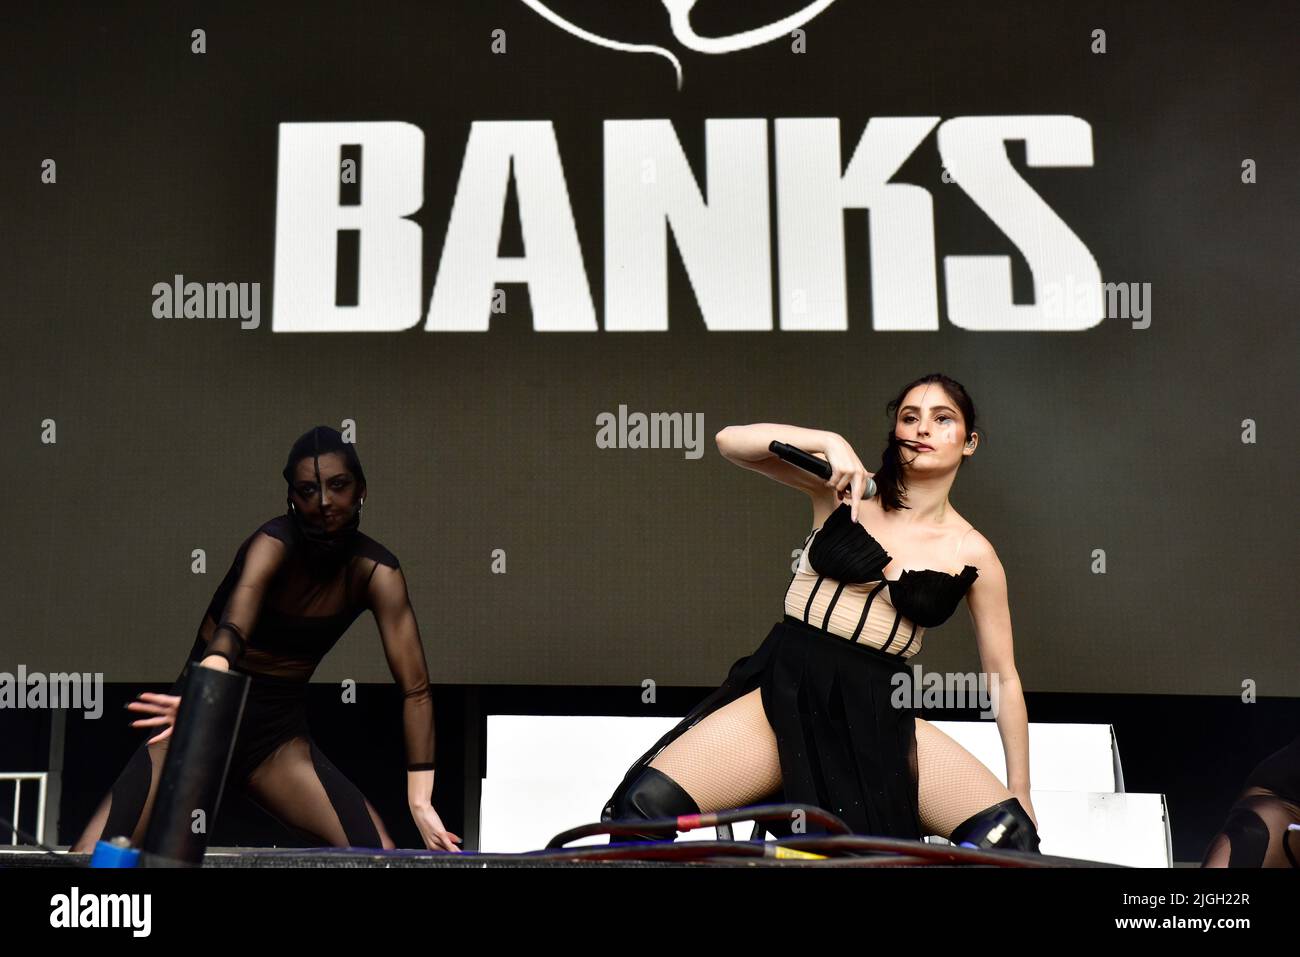 Napa Valley, California, May 28, 2022 - Banks on stage at the 2022 BottleRock Festival in Napa California, Credit: Ken Howard/Alamy Stock Photo